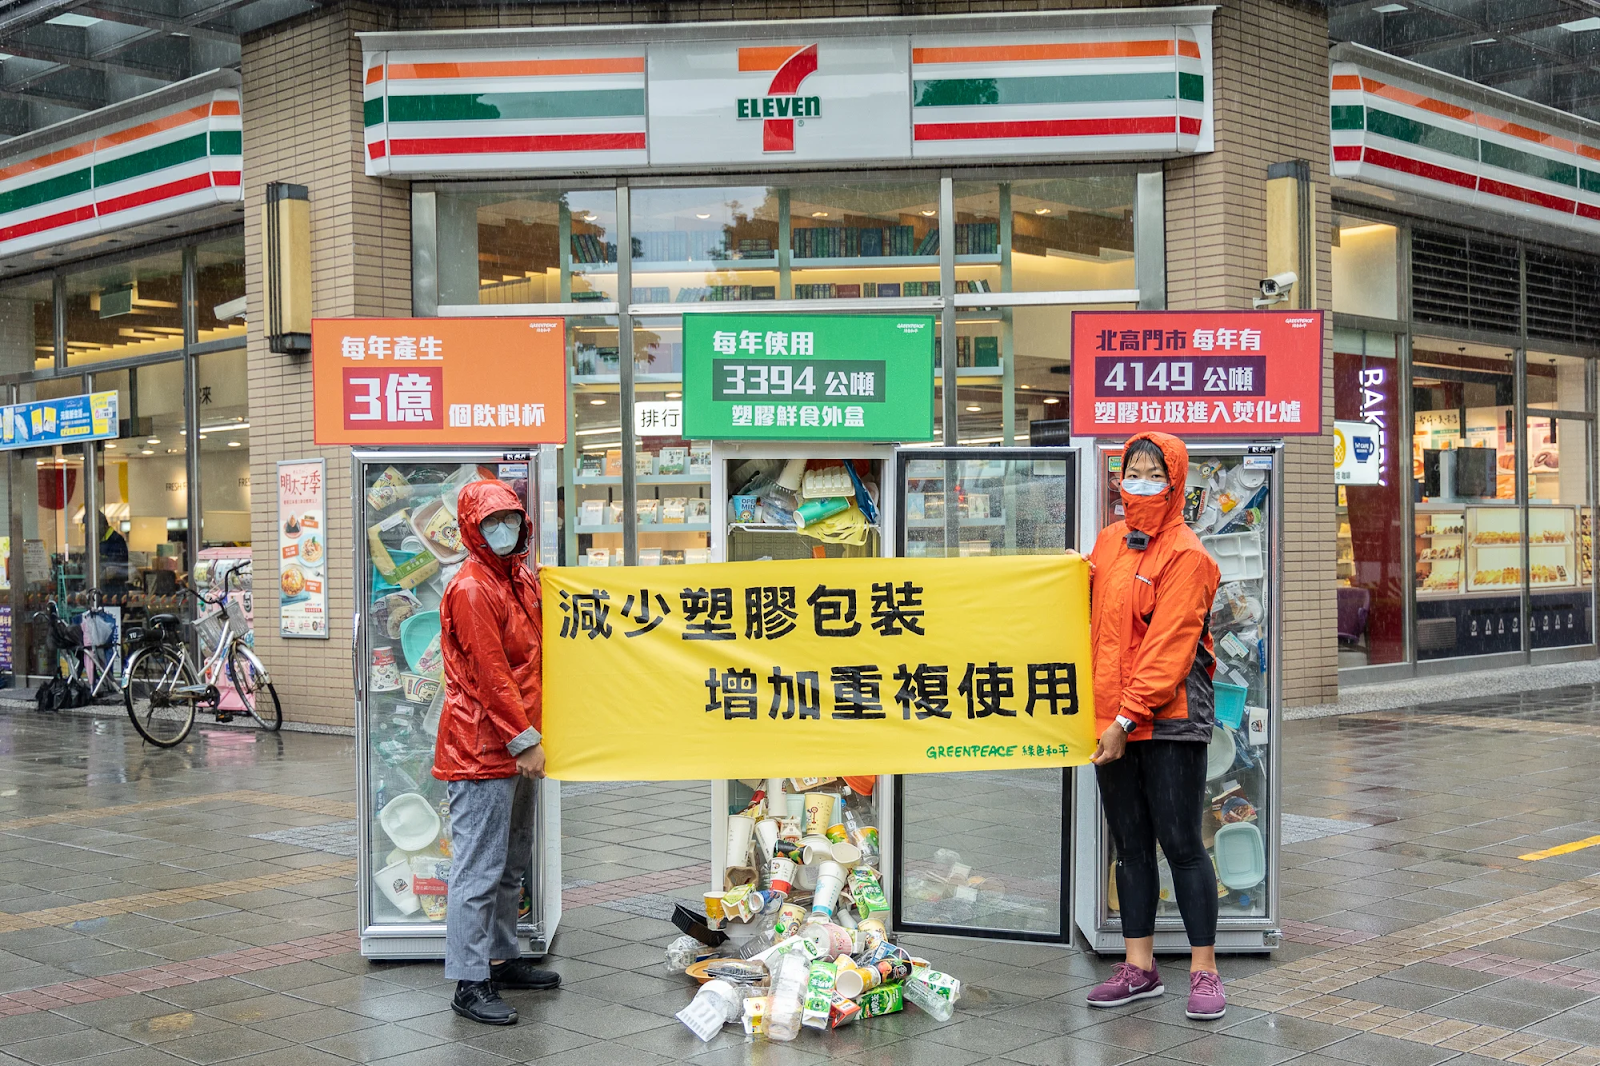 Big steps in Asia! 7-Eleven Taiwan phasing out single use plastics